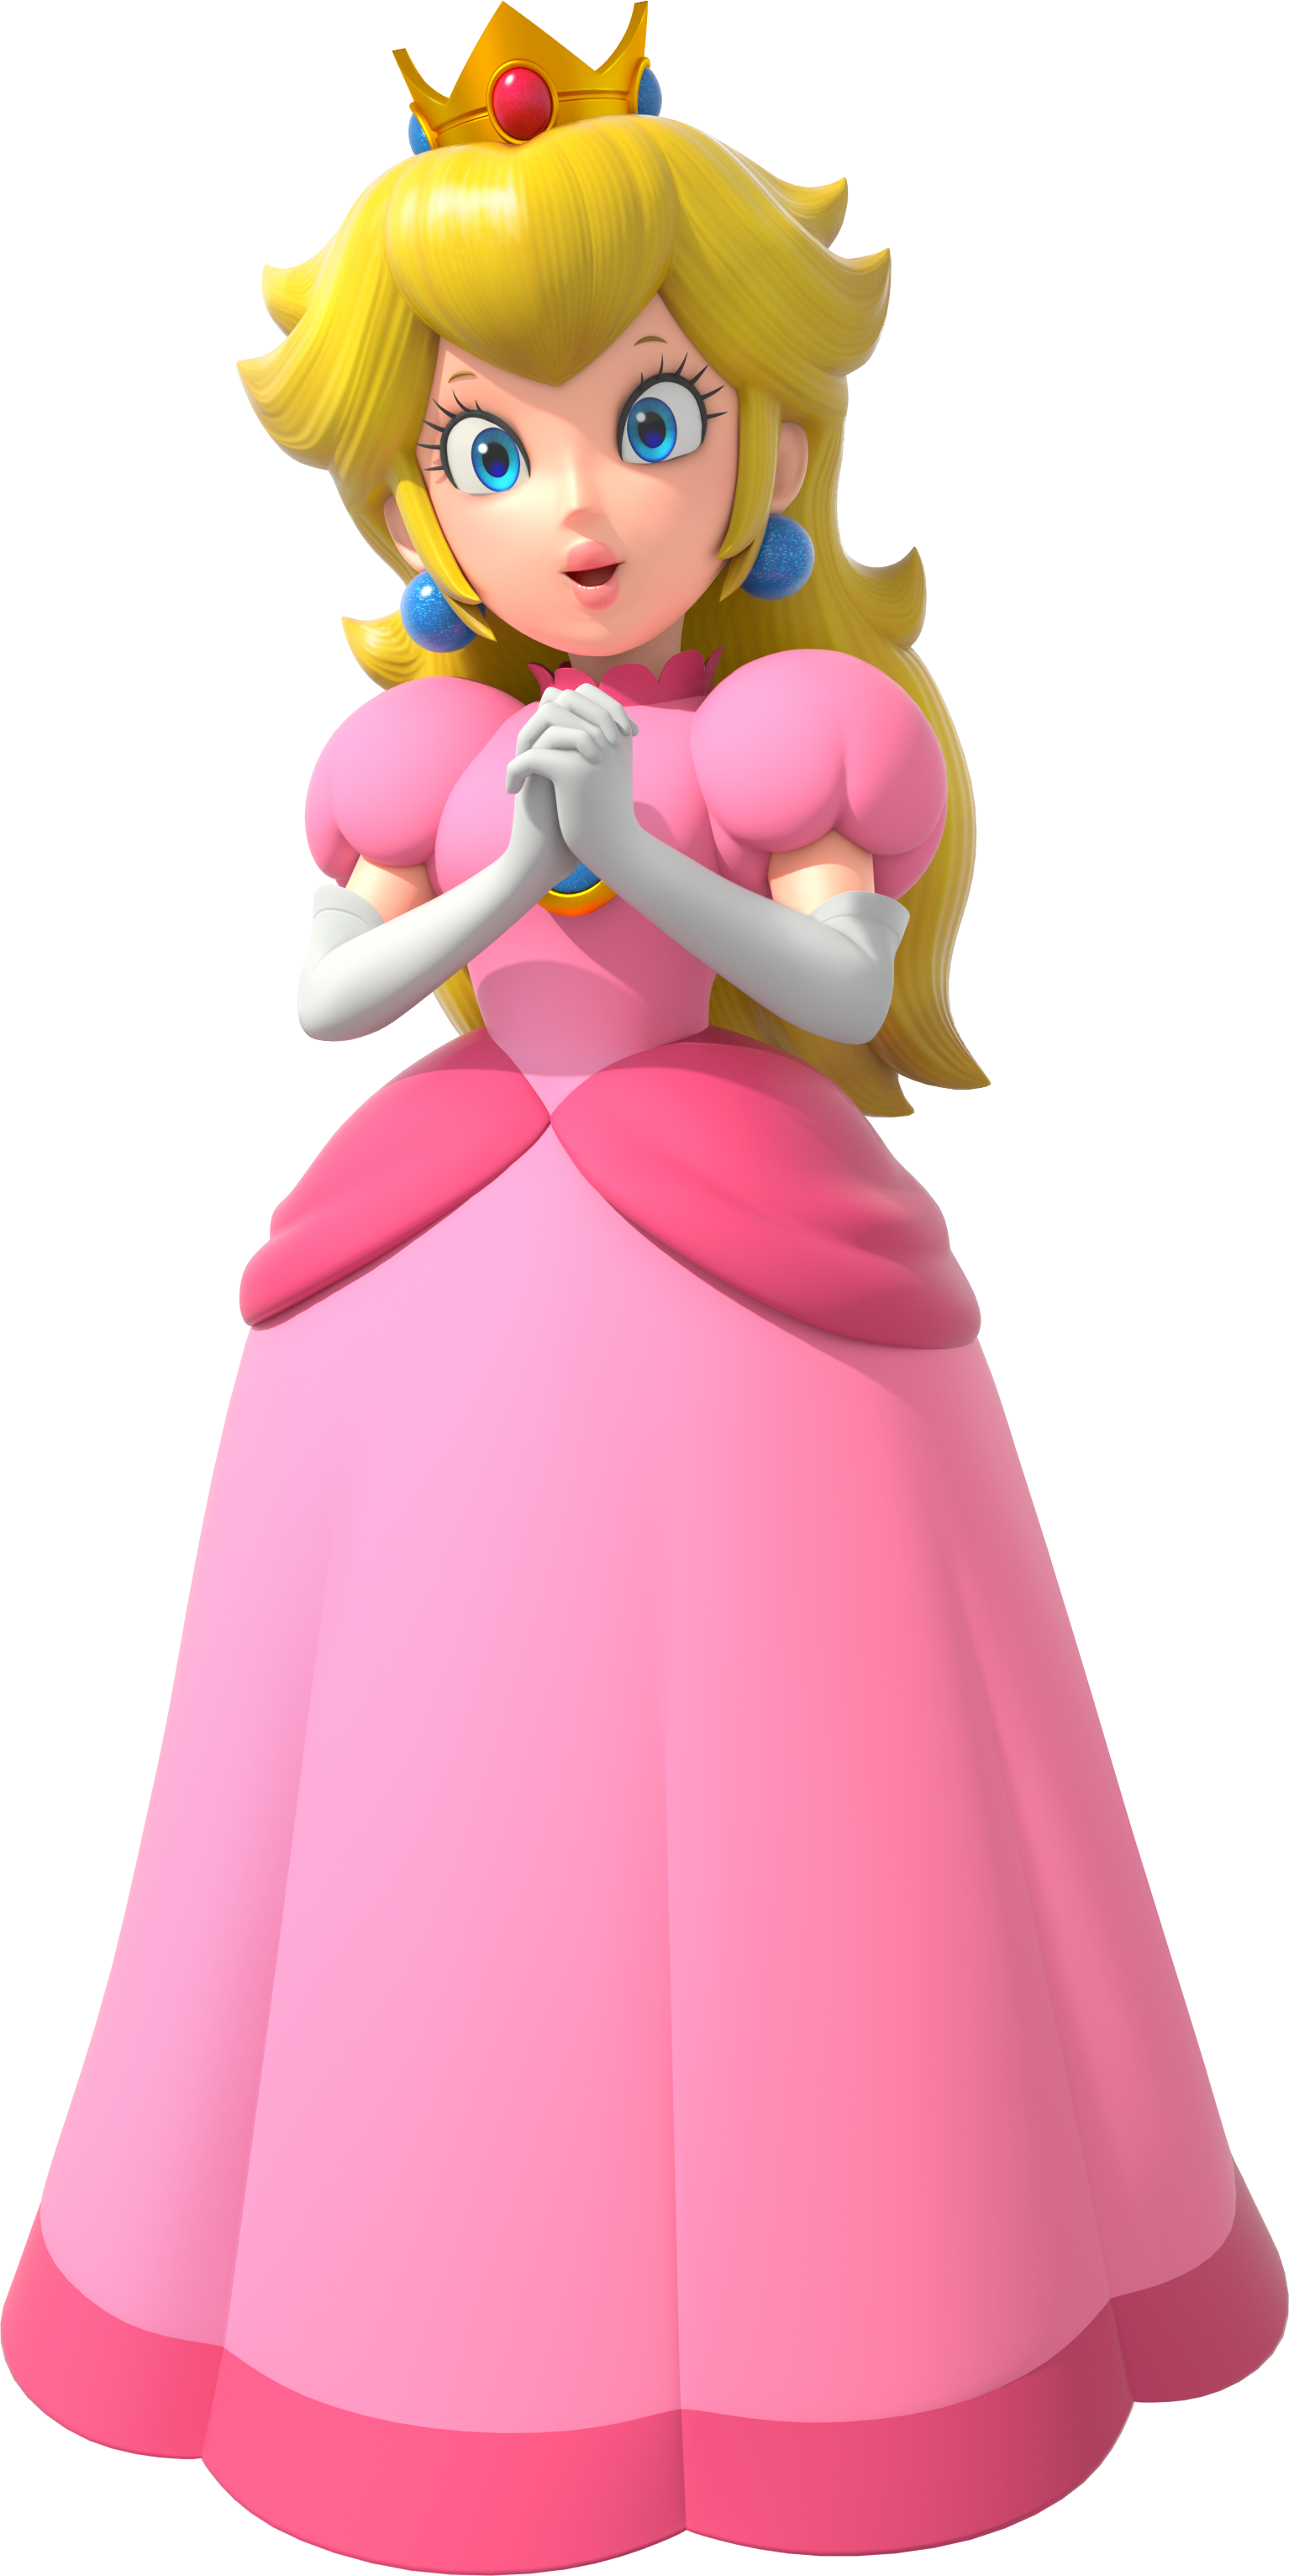 SuperMarioParty_Peach_2.png